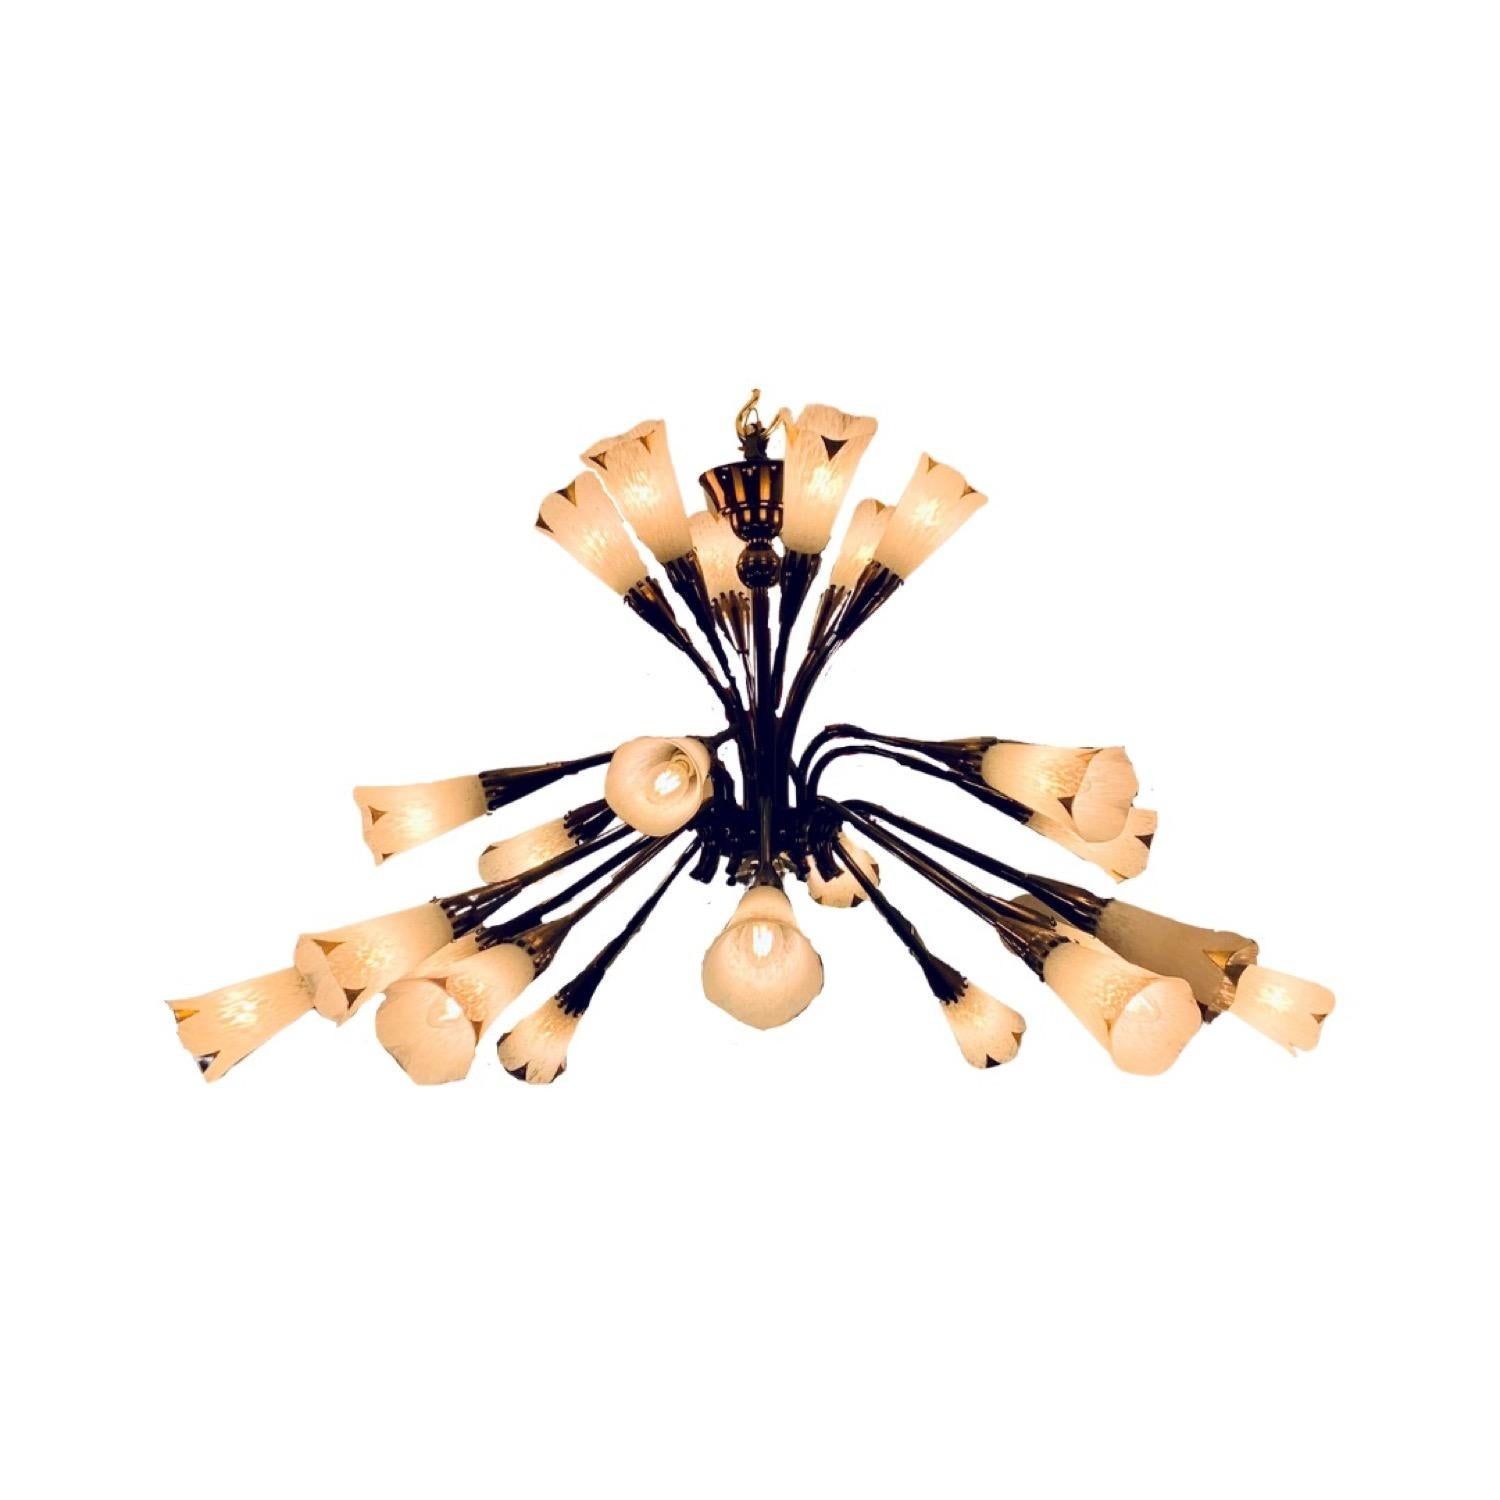 A large, 1950s, mid century, French chandelier by Gênet et Michon. The polished brass frame has a beautiful aged patina and is very well made. The 24 arms are in three-tiers - 6 positioned towards the ceiling, 6 below and 18 around the outside each